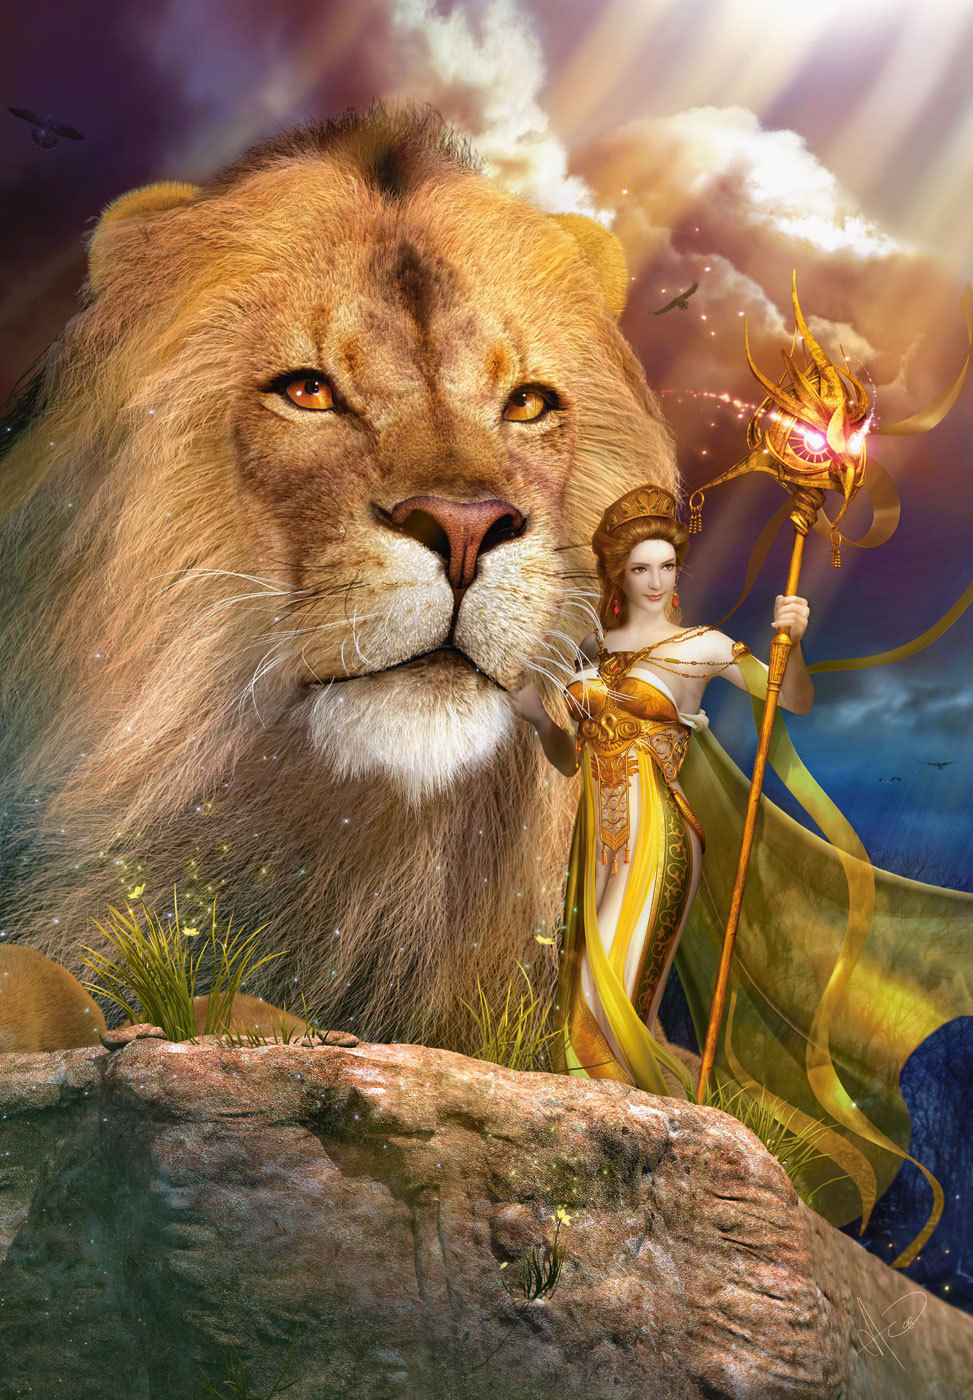 14327 download wallpaper fantasy, people, lions, girls, orange screensavers and pictures for free